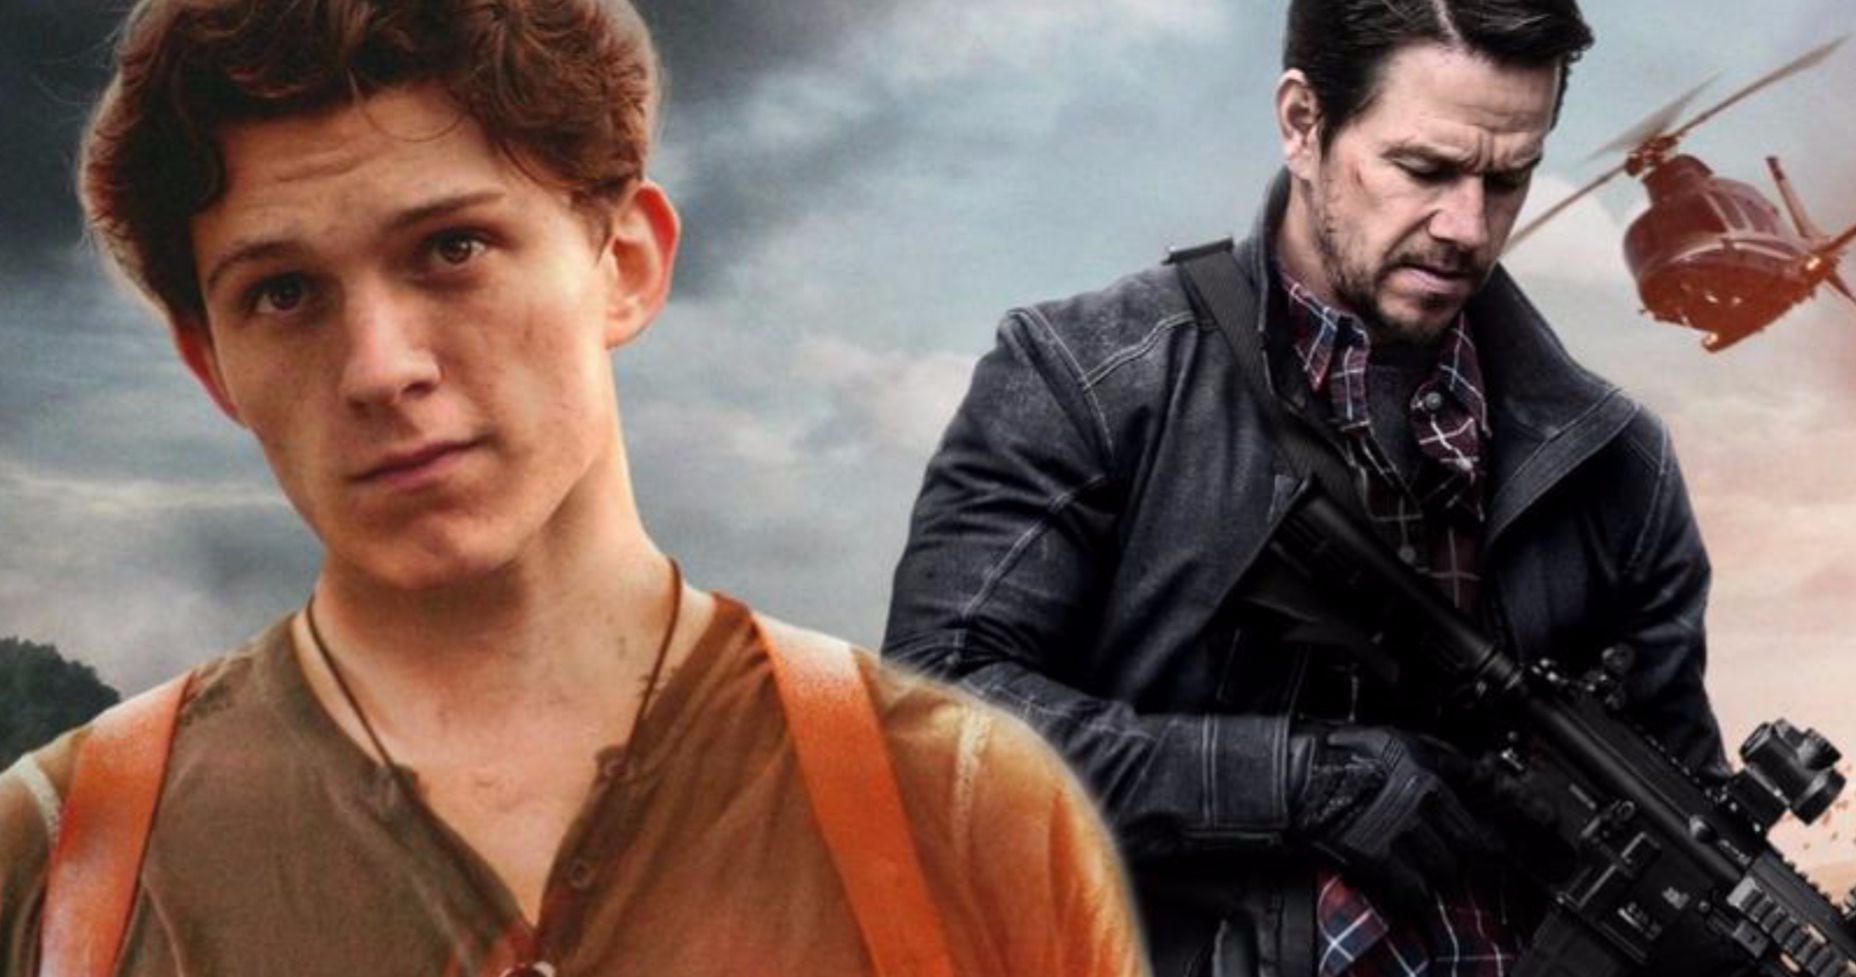 Uncharted Movie Reveals First Look at Tom Holland & Mark Wahlberg